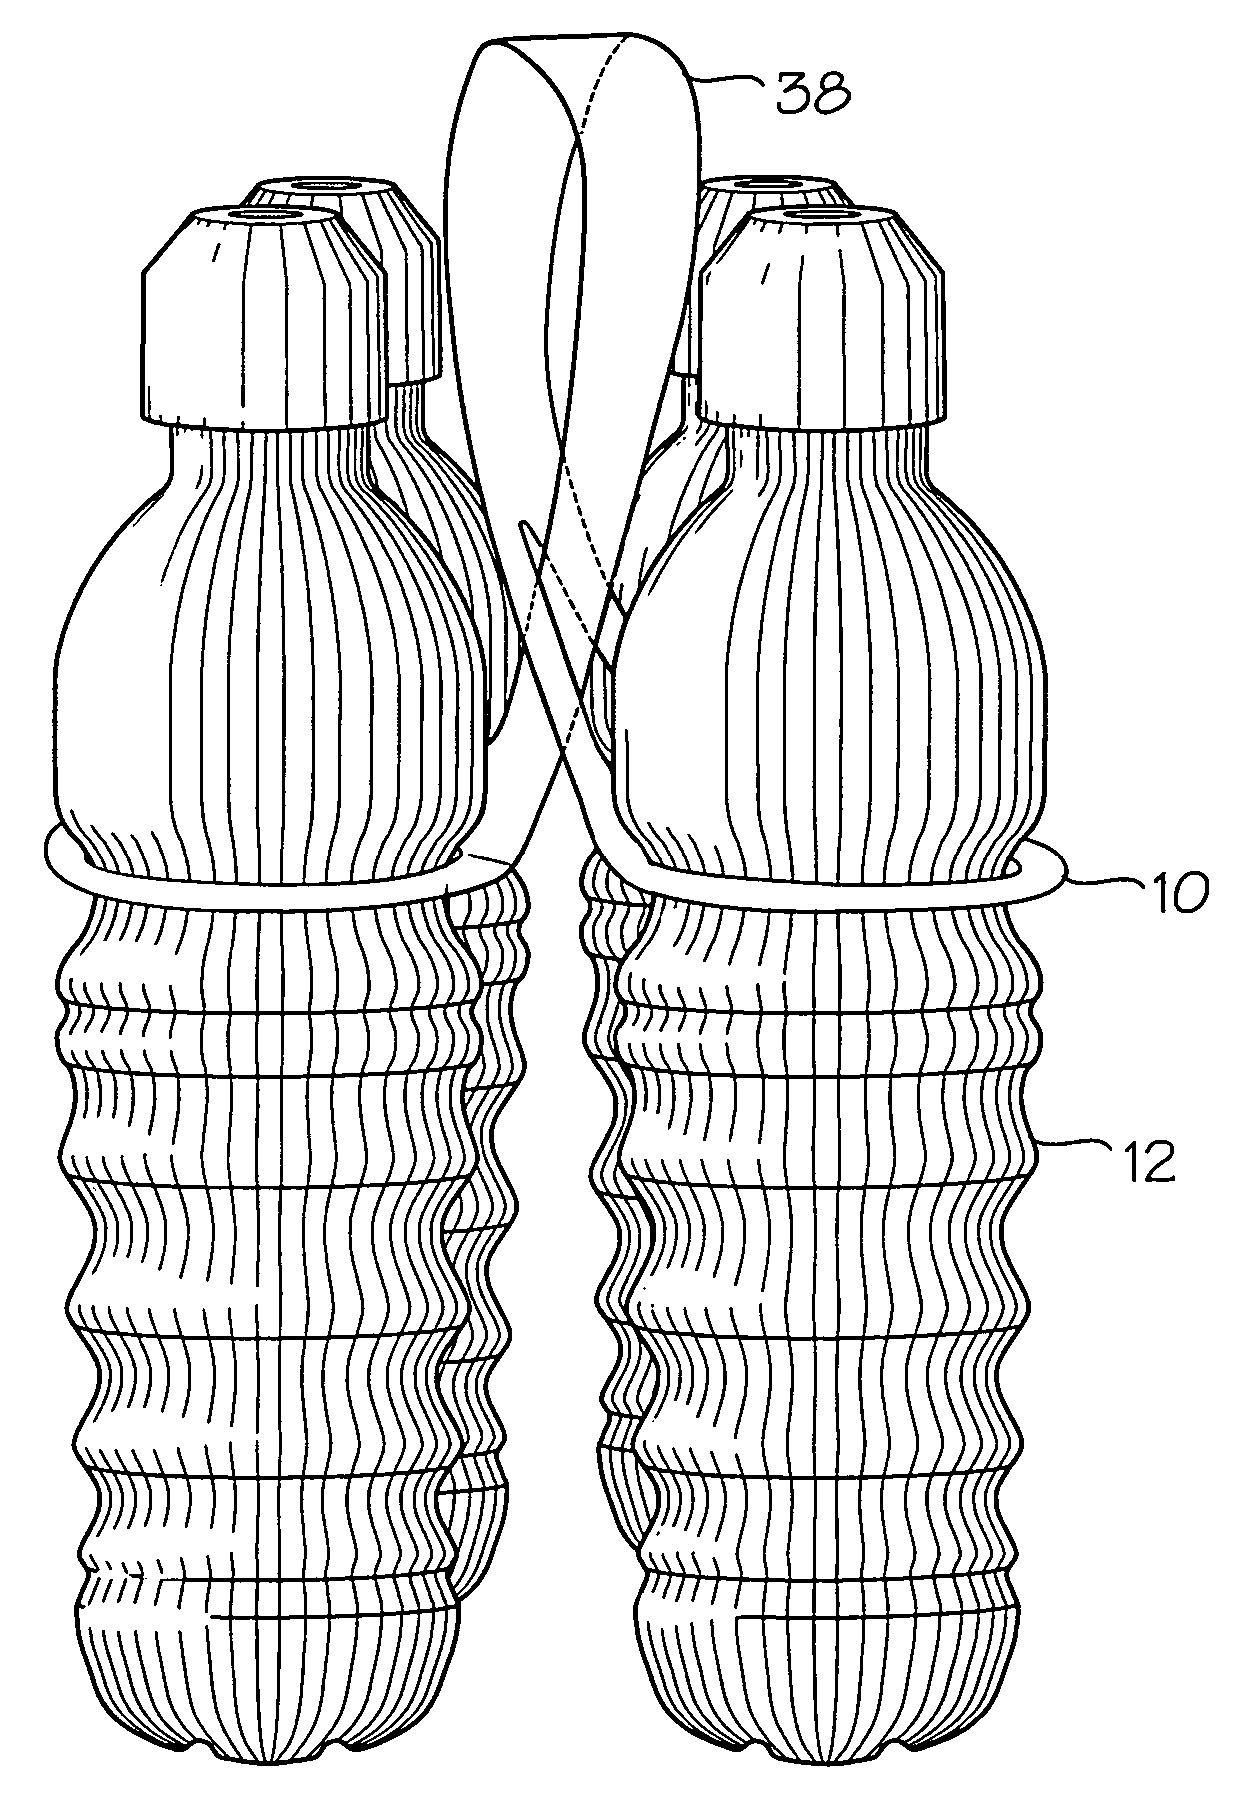 Bottle carrier with handle and pull tab